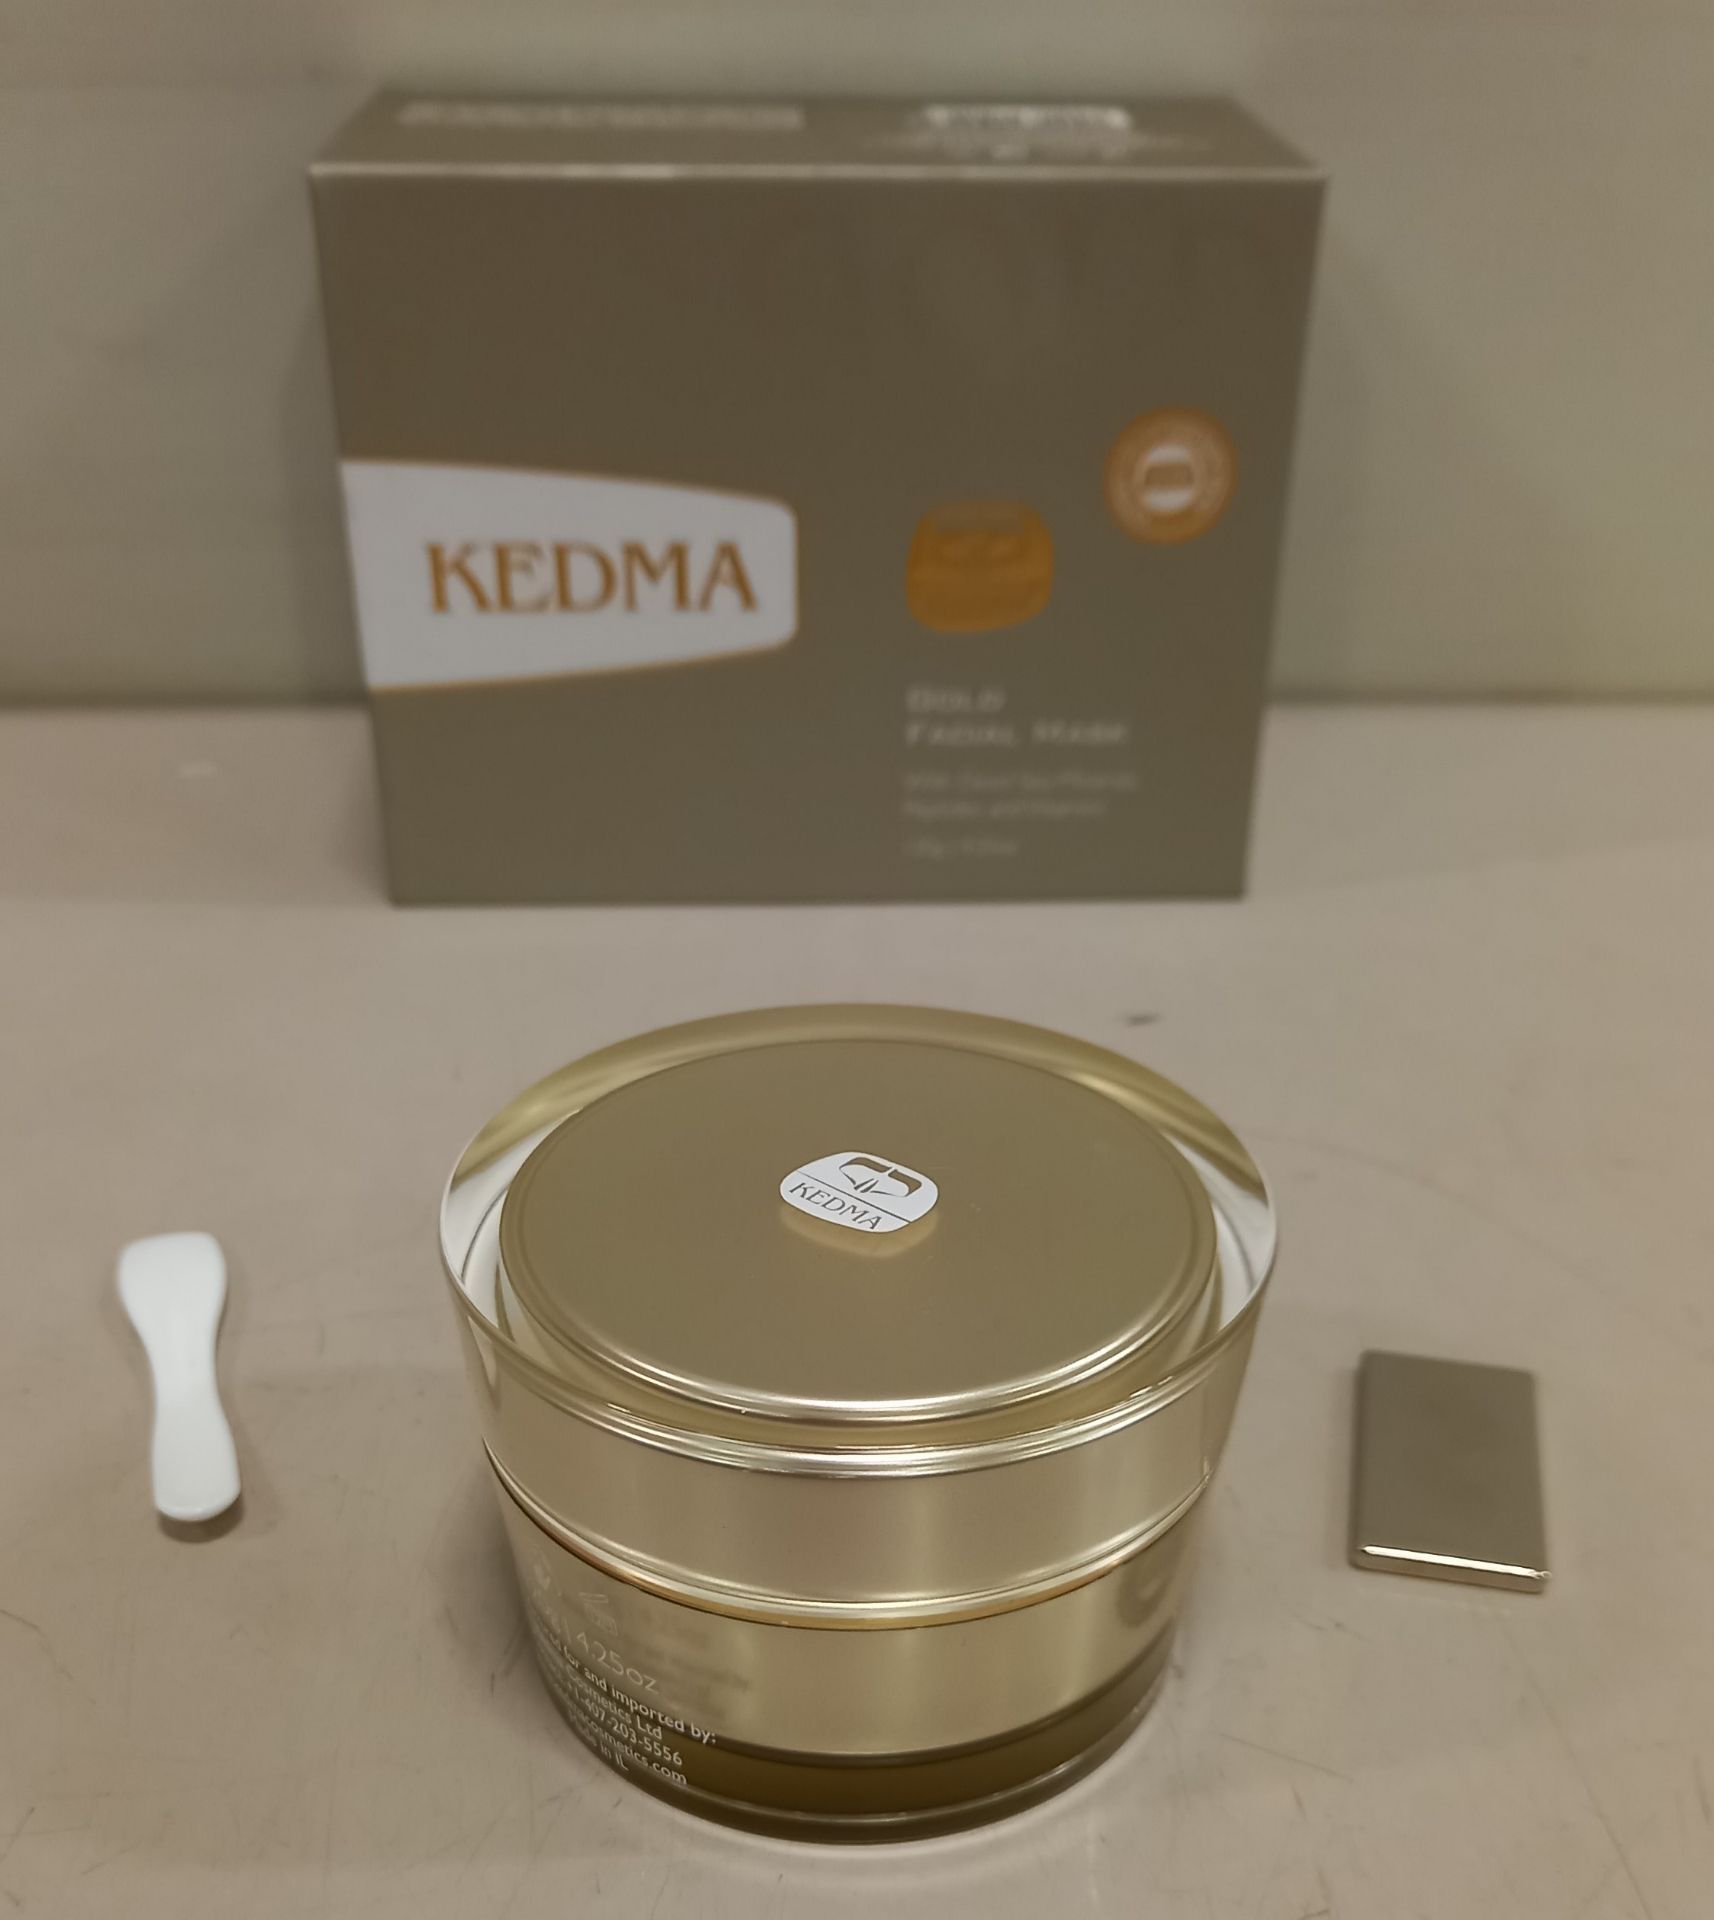 2 X BRAND NEW BOXED KEDMA 24K GOLD FACIAL MASK WITH DEAD SEA MINERALS, PEPSIDES AND VITAMINS - 120G